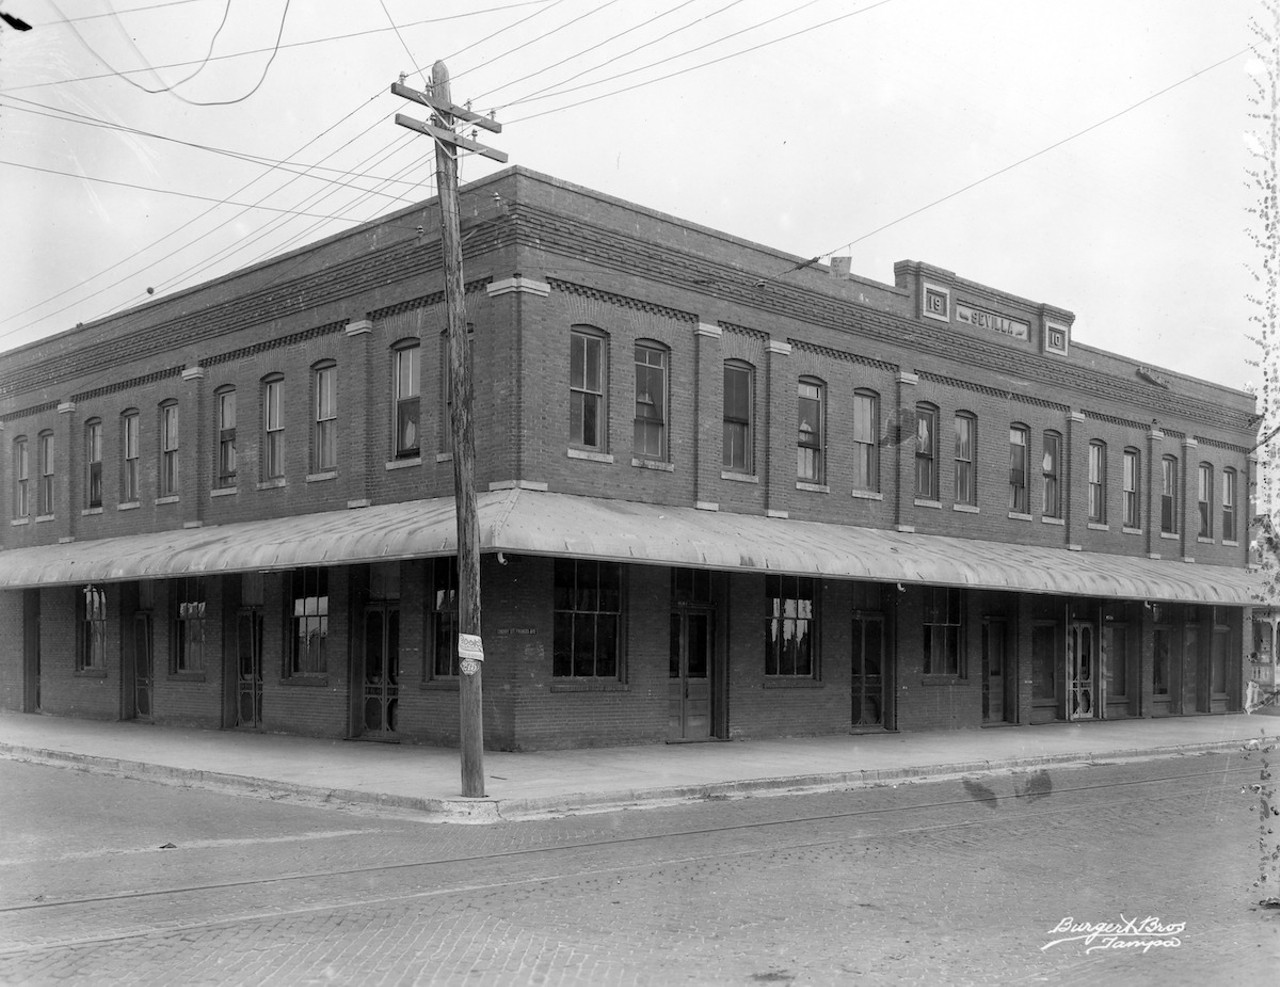 Strike Street soup, 1920
Unlike most Floridians, the immigrants of Ybor City and West Tampa (Sevilla building c.1923, pictured here) were not sheepish about unionizing and making demands of their employers. Unions managed to score a few victories in the early years, but they did not continue. When the cigar industry originally settled in Tampa, it did so with the knowledge that the city had agreed to lend its police force to the factory owners when labor troubles arose. During the strike of 1920, determined workers endured for 10 months outside the factories. The Tampa Tribune, at the time a zealous anti-labor advocate, raised the specter of “over-paid and corn-fed agitators [who] intend to absolutely annihilate the cigar industry in this city.” Labor newspaper El International fired back, saying that the pampered factory owners “Don’t know the anarchist-breeding effect of hunger on the victim ... champagne and caviar have always been at their service.”
In 1920, the producers stood firm against the strike, and employed the police and vigilantes to ransack the soup kitchens. They threw the food into the manure-laden streets. The destruction of soup kitchens dealt the union a deadly blow. Before long, even the most fanatical strikers began to cave. The strike ended in February 1921 with $12 million in wages lost. The unions never fully recovered from the debacle.
Photo via Burgert Brothers/USF